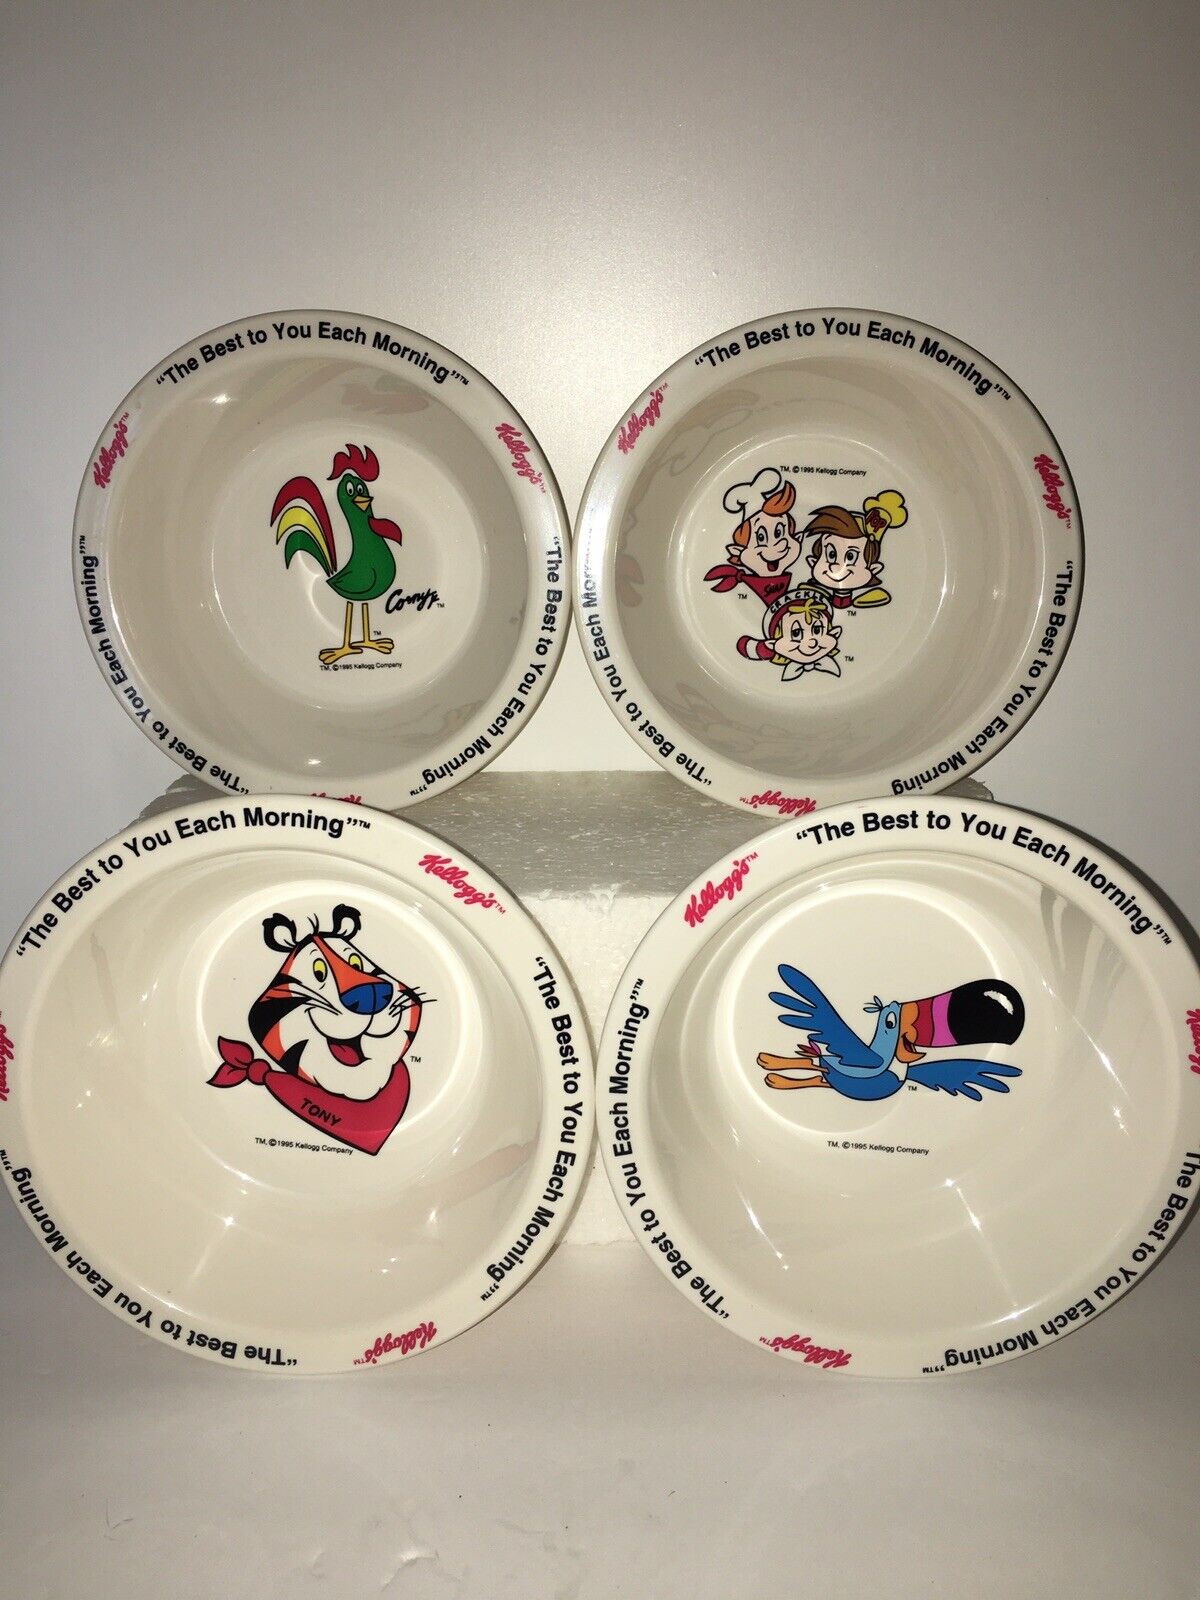 Vintage 1995 Kellogg's Cereal Bowls Set  of 4 Characters in Original Packaging